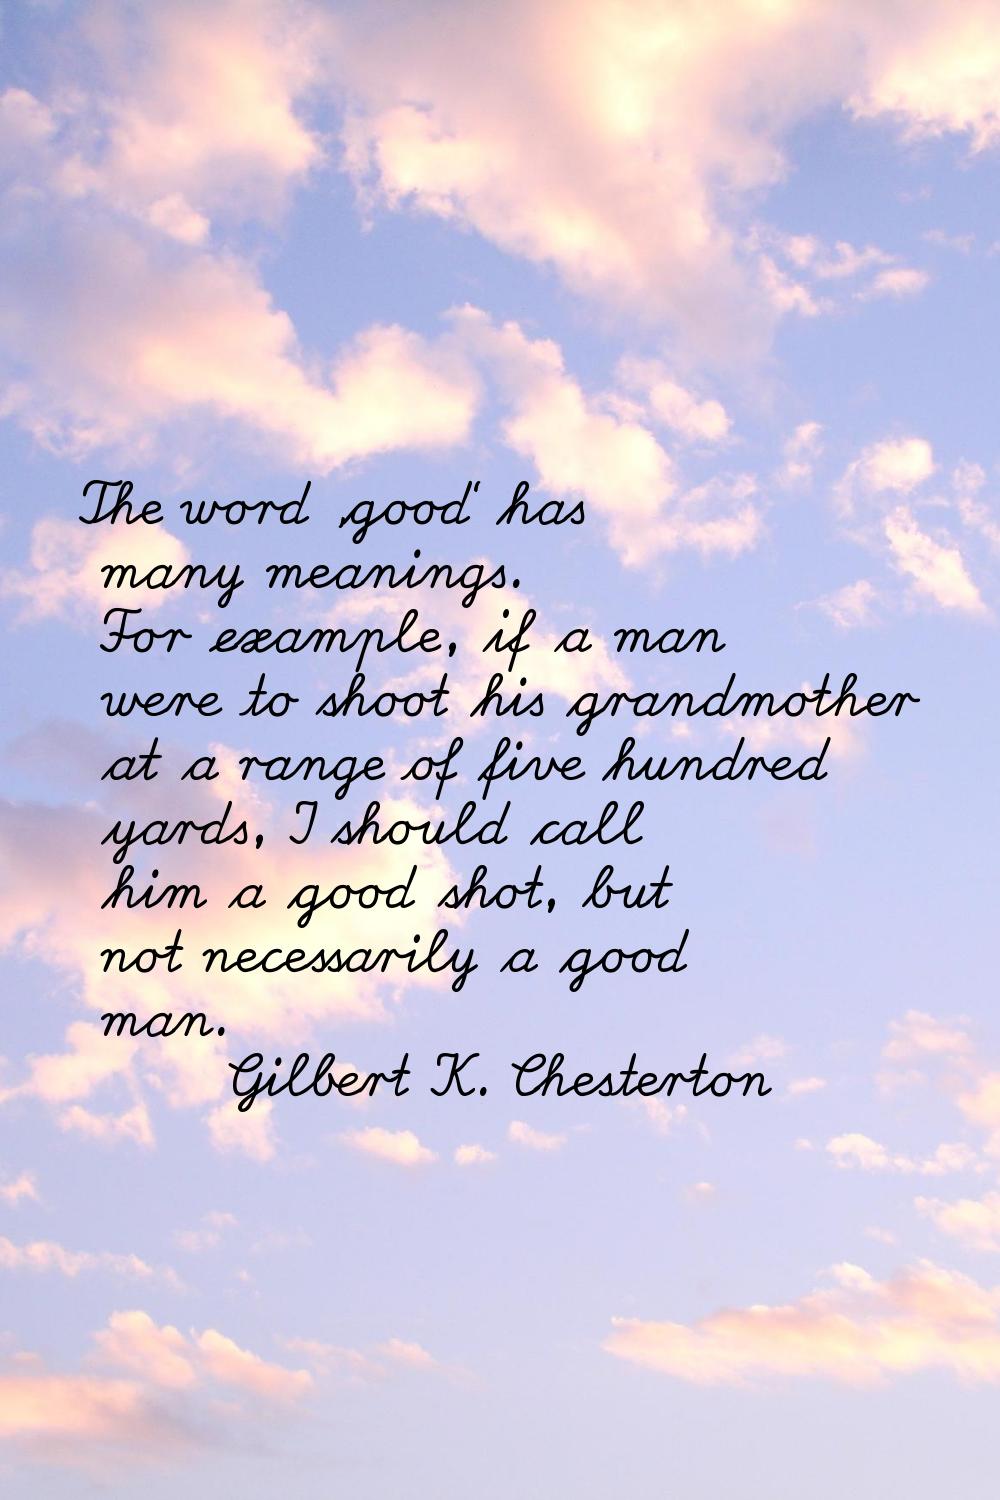 The word 'good' has many meanings. For example, if a man were to shoot his grandmother at a range o